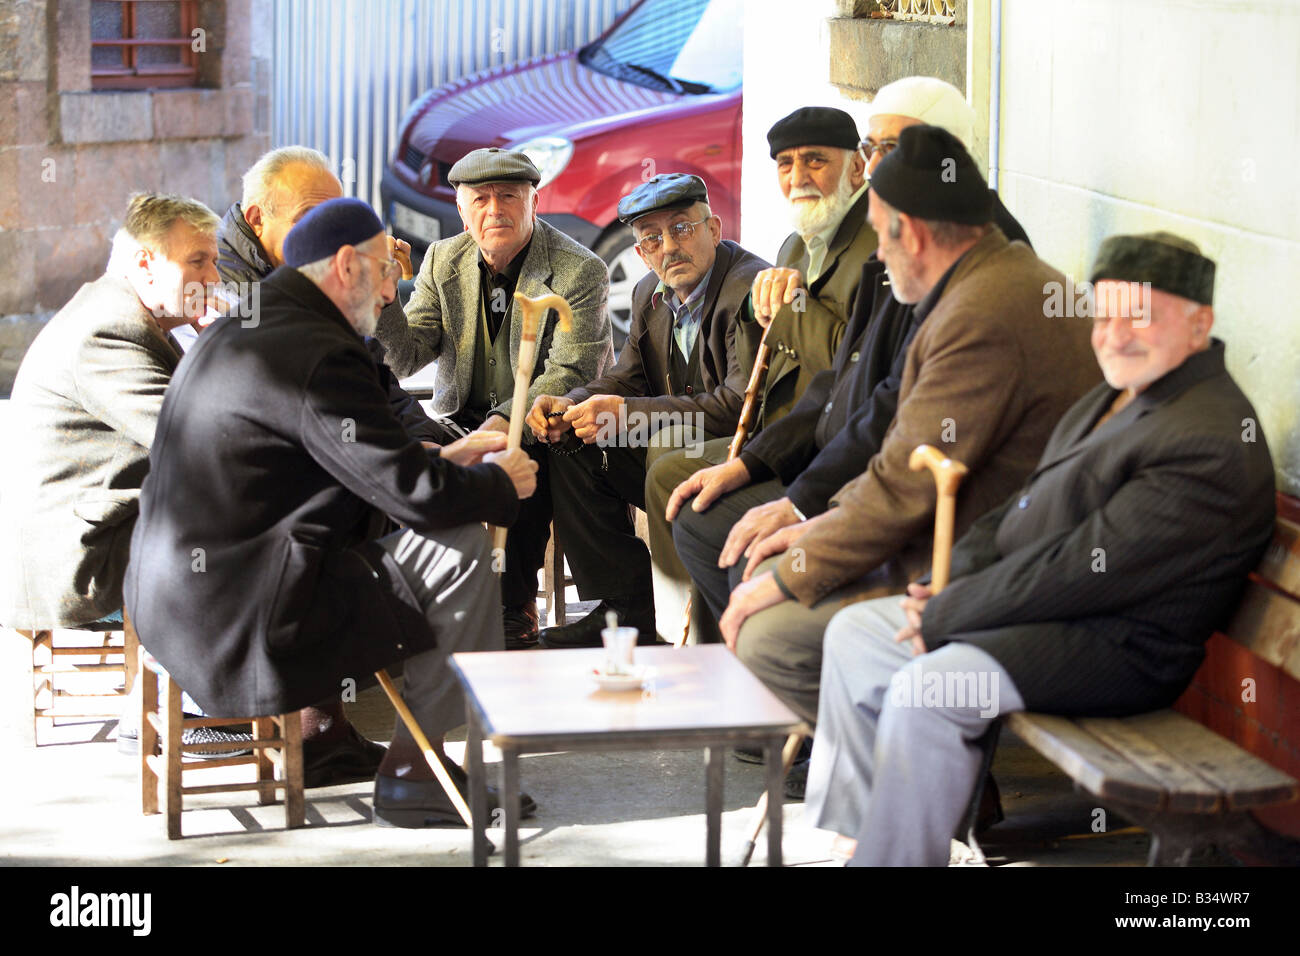 group-of-old-men-during-a-conversation-trabzon-turkey-B34WR7.jpg